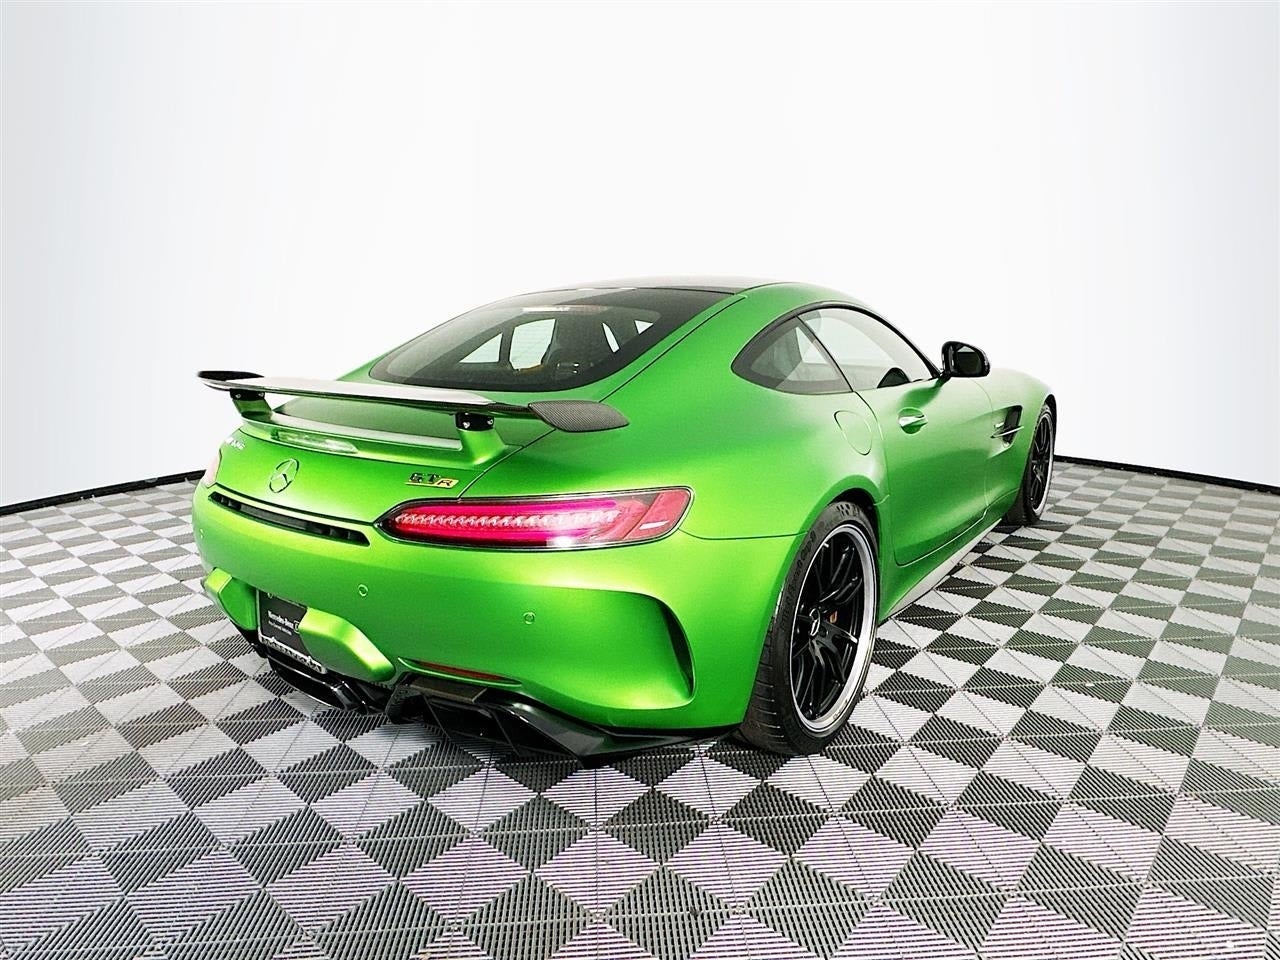 2018 Mercedes-Benz AMG® GT AMG® GT R Coupe